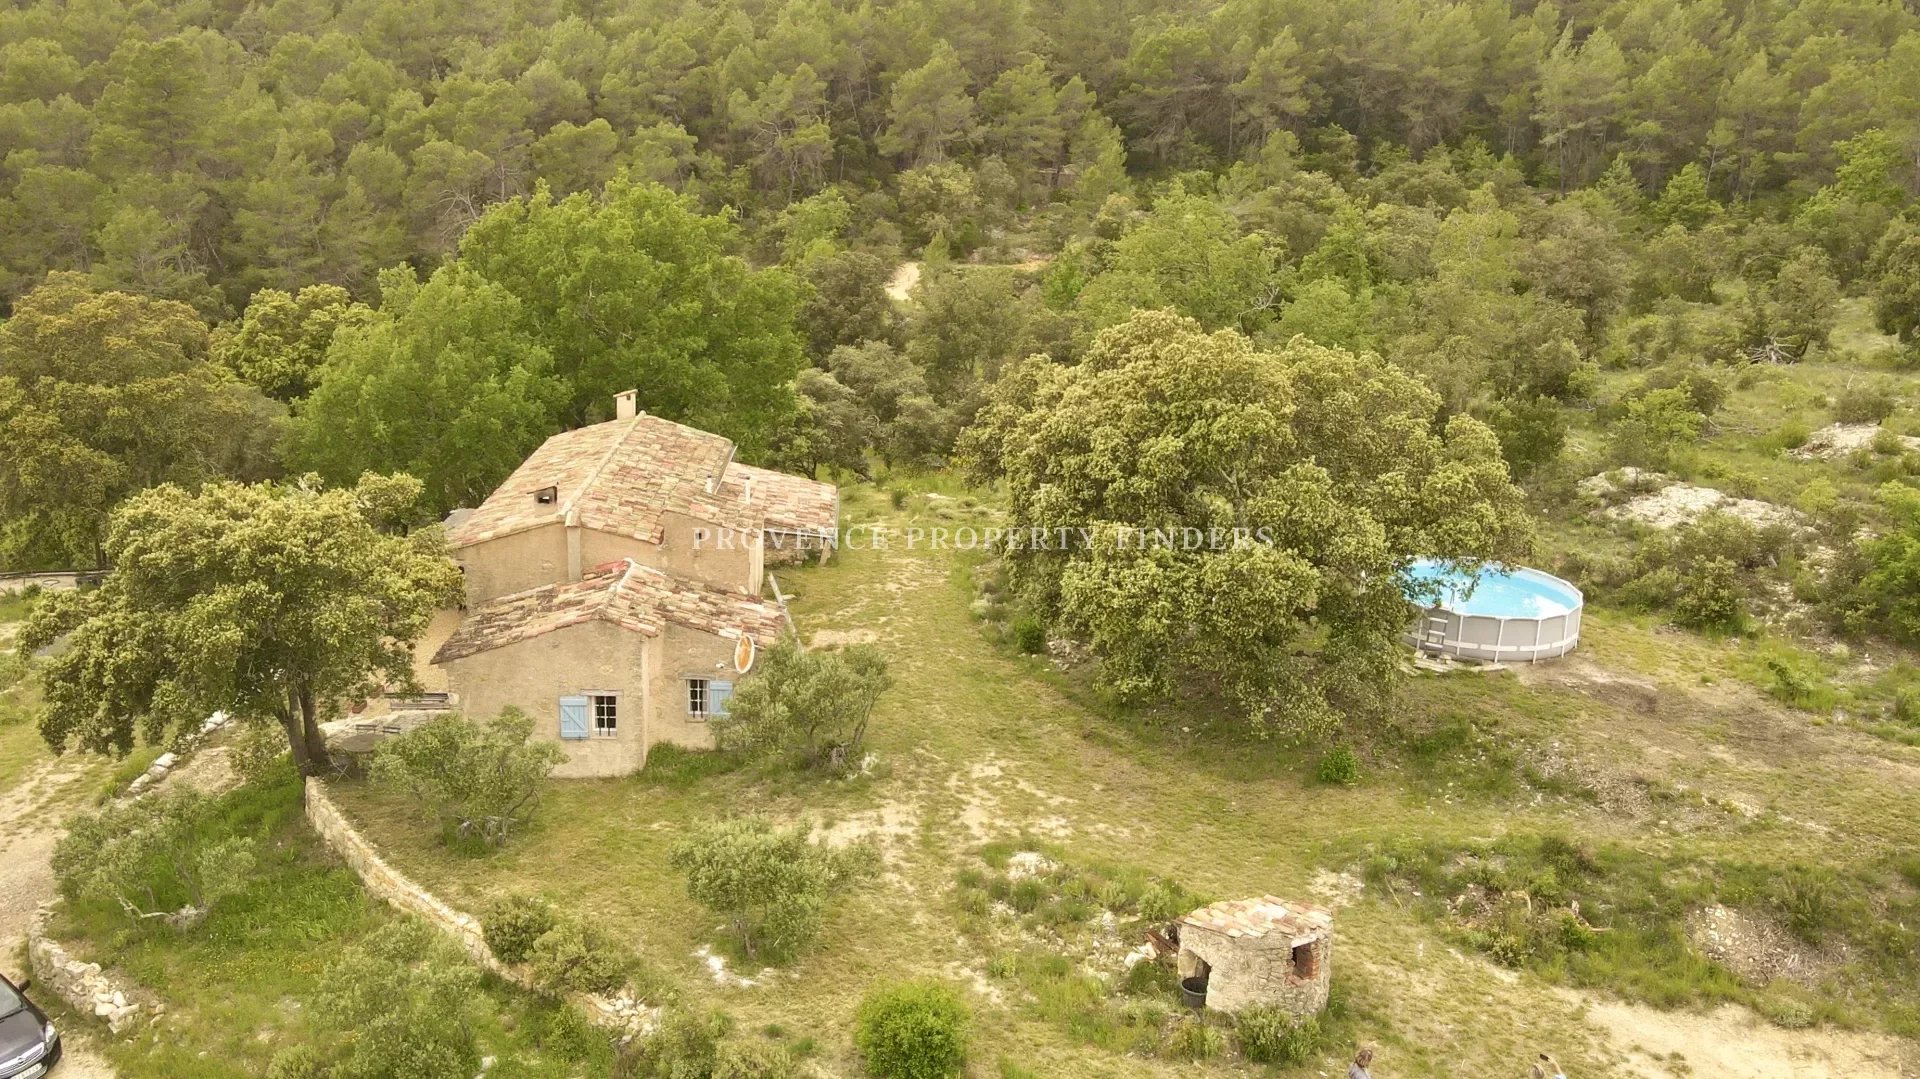 Large Property for sale with old farm house, Cotignac.